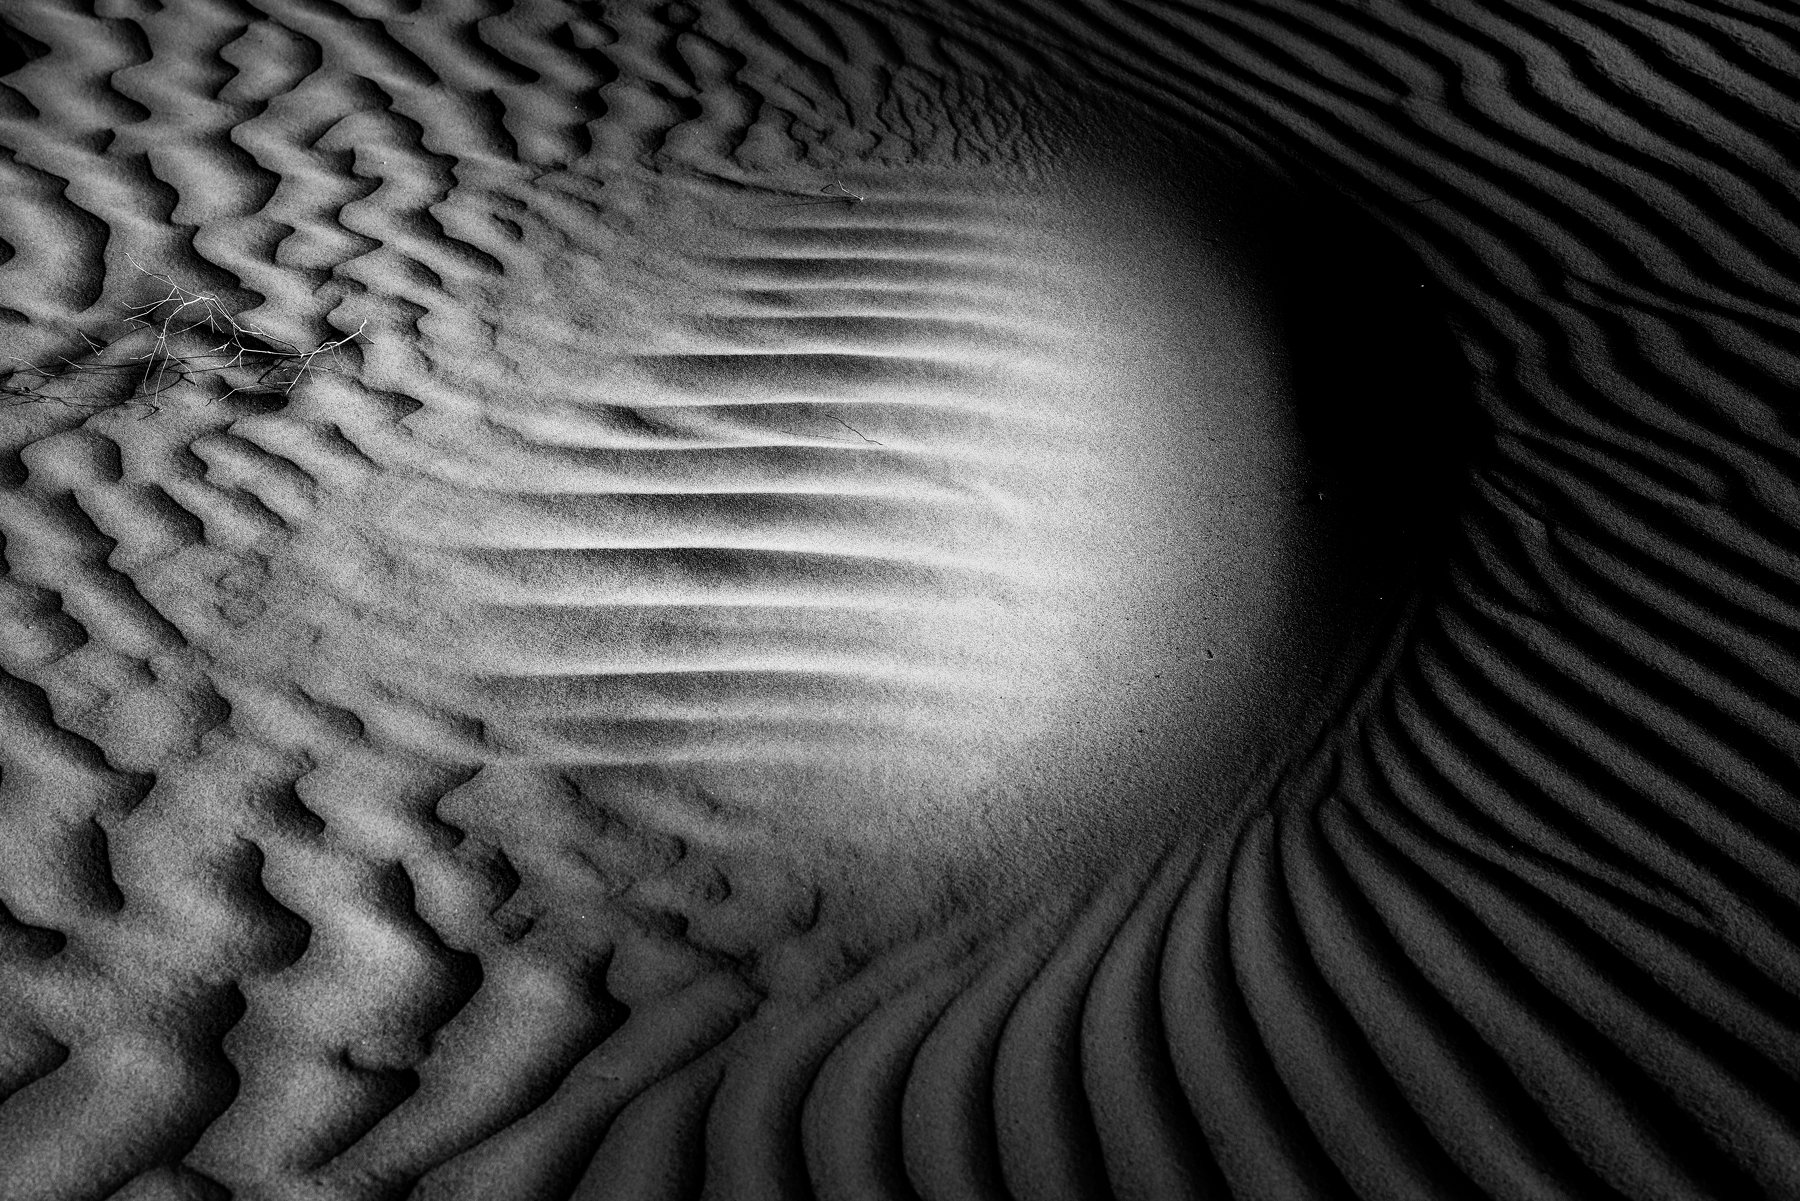 Sand,composition,black and white, hussein najem